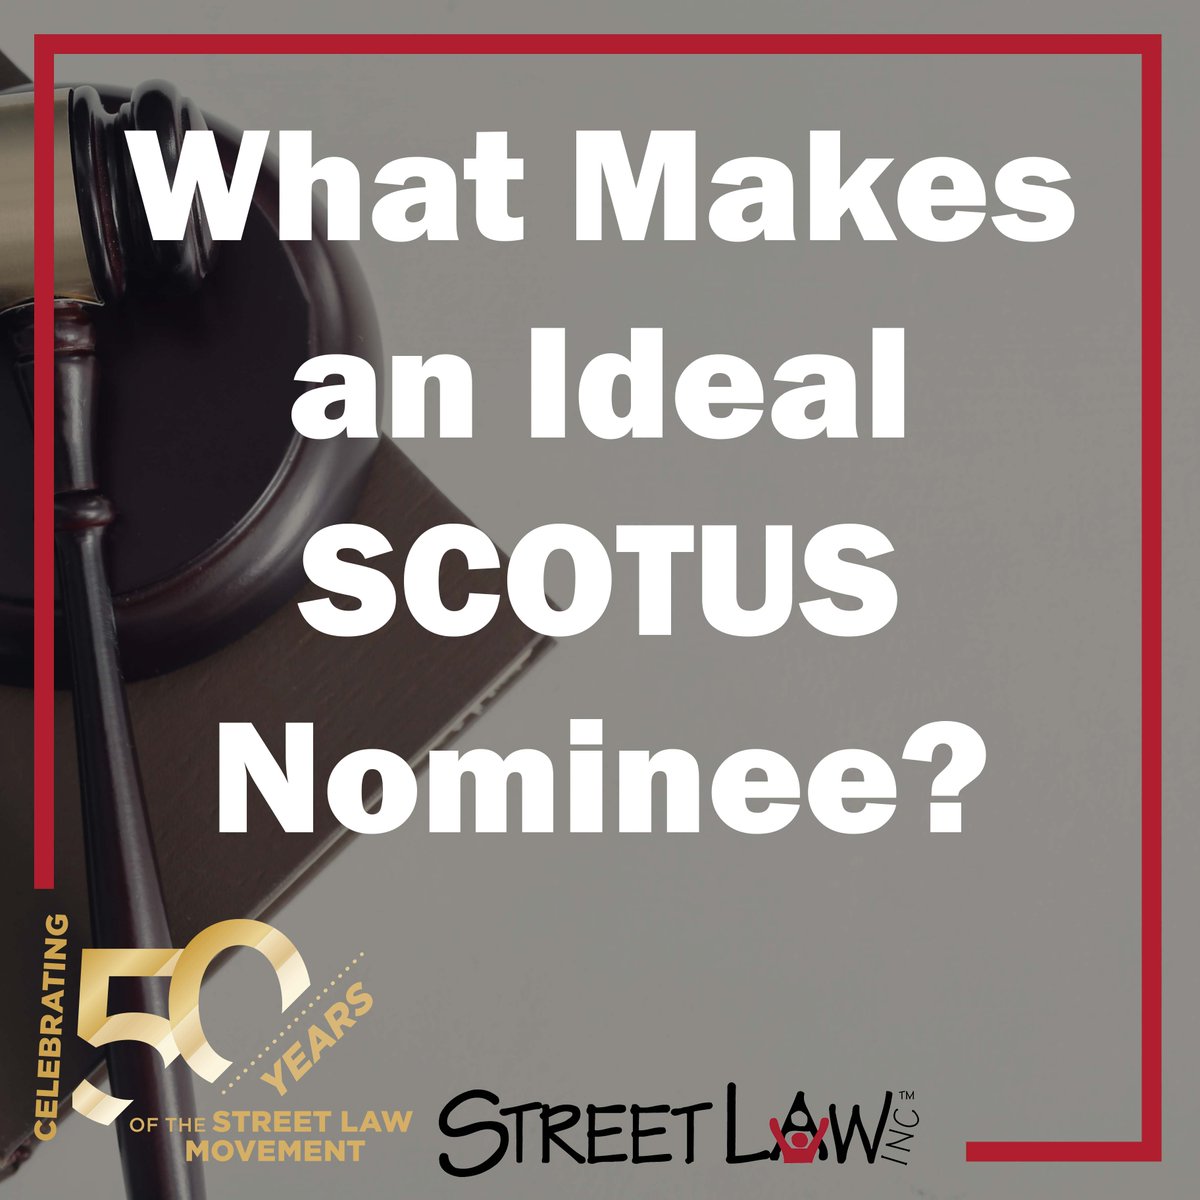 With the news of Justice Breyer's retirement at the end of the #SCOTUS term, now is an excellent time to explore our 'What Makes an Ideal SCOTUS Nominee?' activity! (cont.) store.streetlaw.org/ideal-SCOTUS-n…